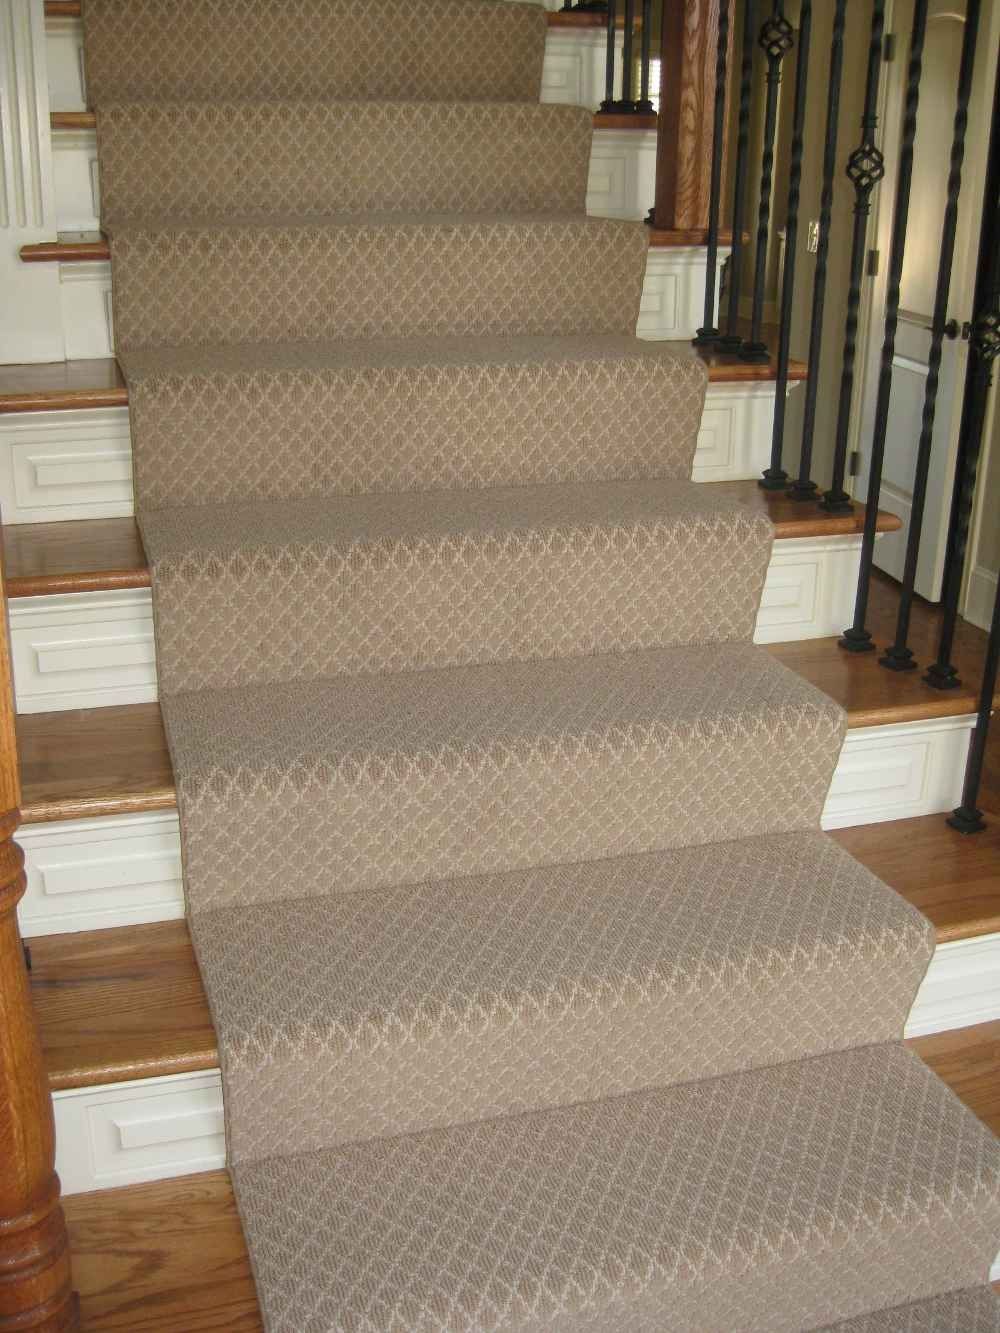 Keep Plastic Carpet Runners For Stairs Interior Home Design For Plastic Carpet Protector Hallway Runners (View 16 of 20)